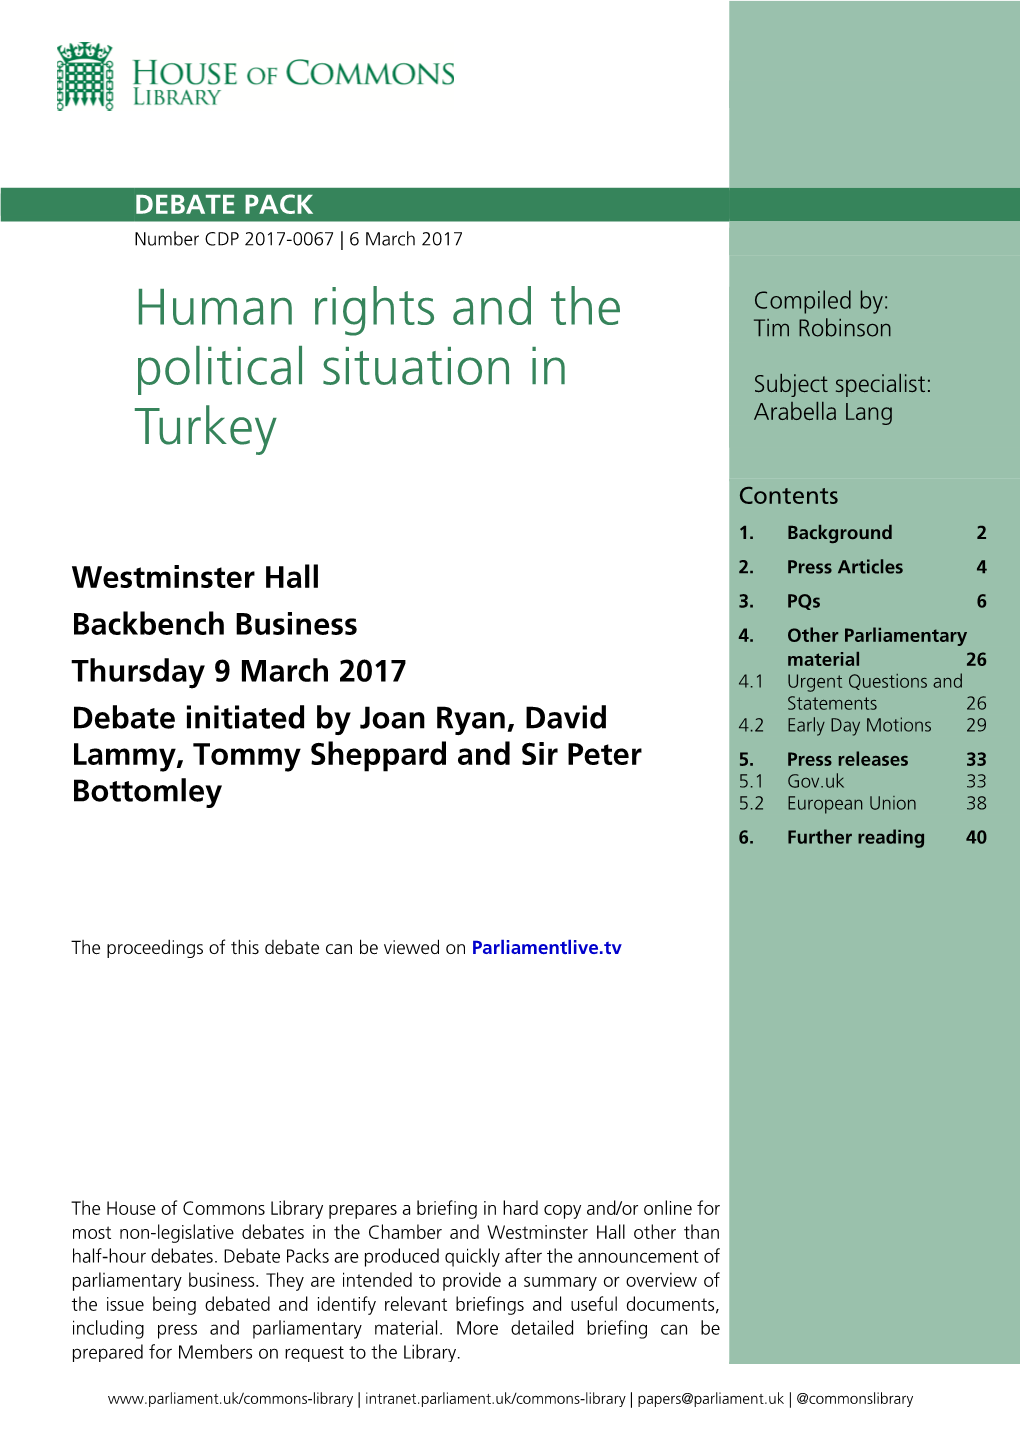 Human Rights and the Political Situation in Turkey 3